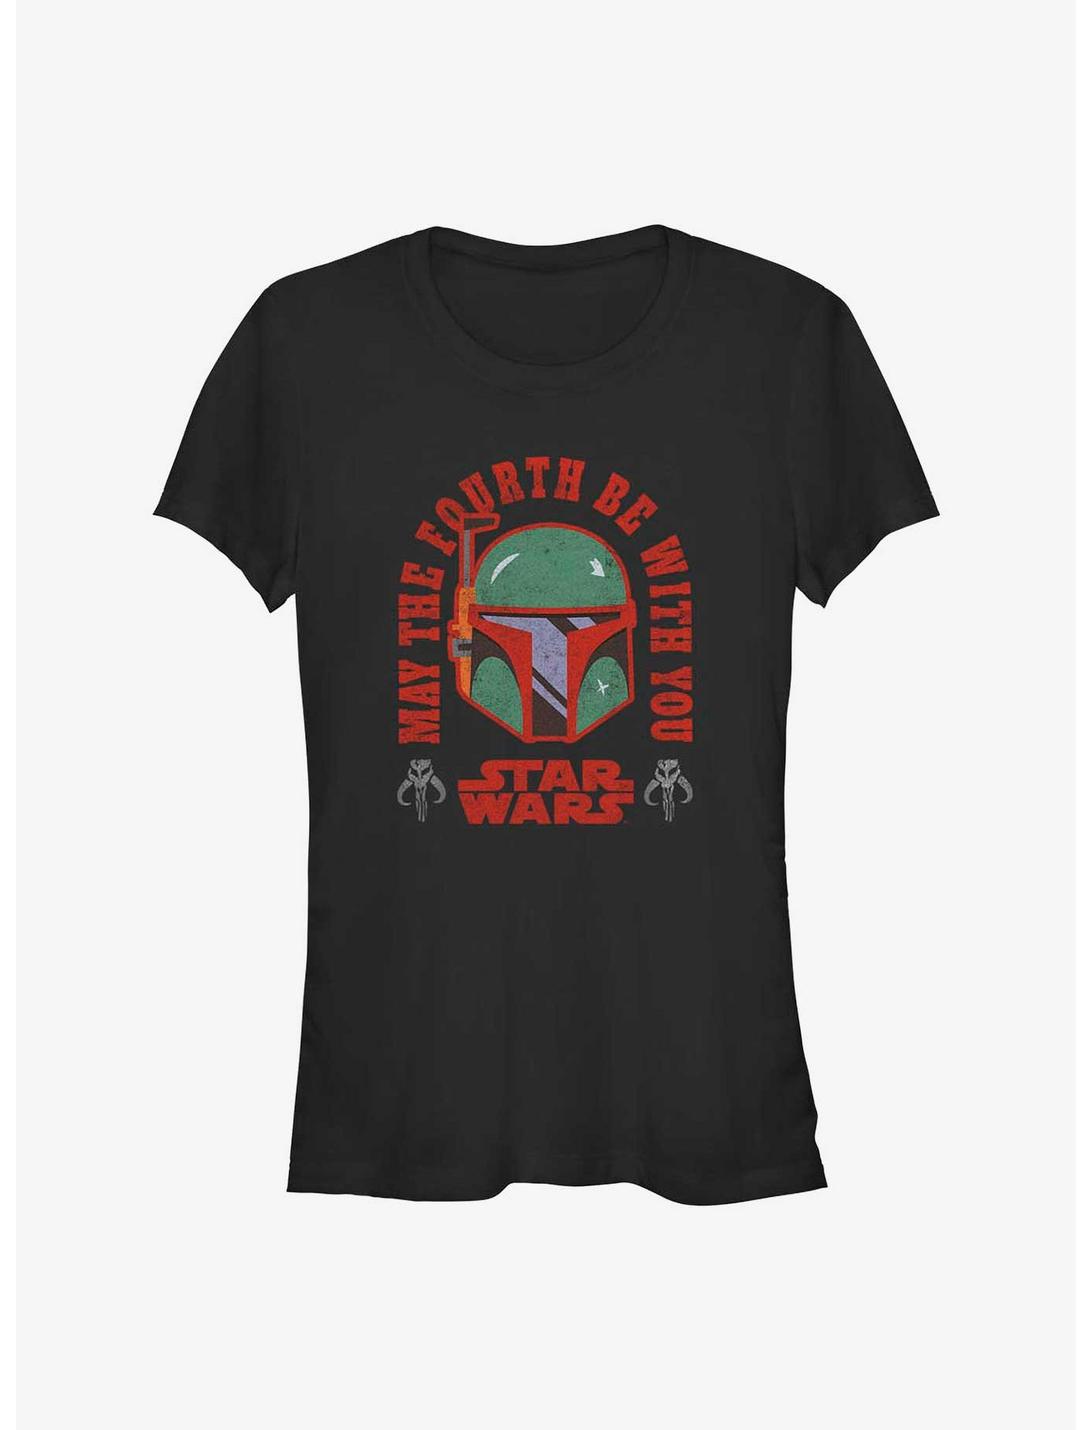 Star Wars May The Fourth Be With You Girls T-Shirt, BLACK, hi-res